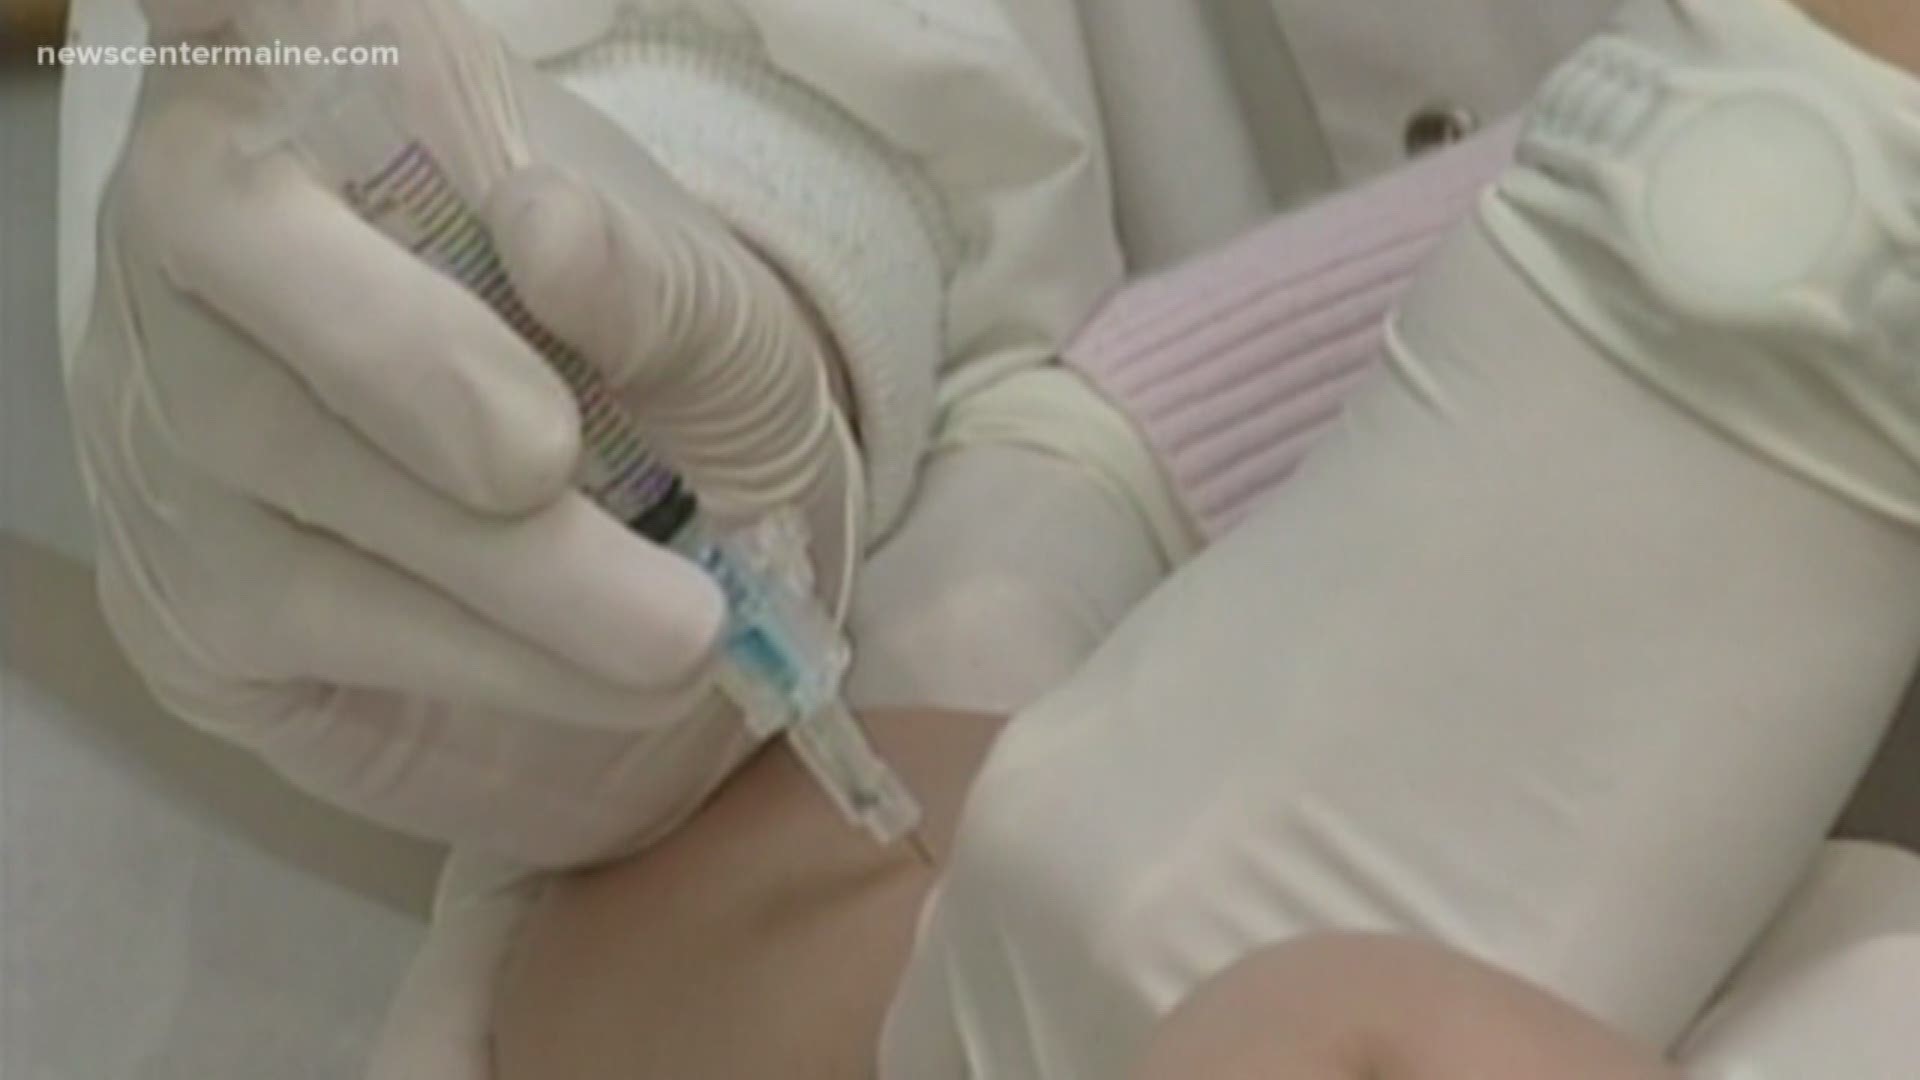 There are more and more confirmed cases of pertussis in Maine schools, according to the CDC.